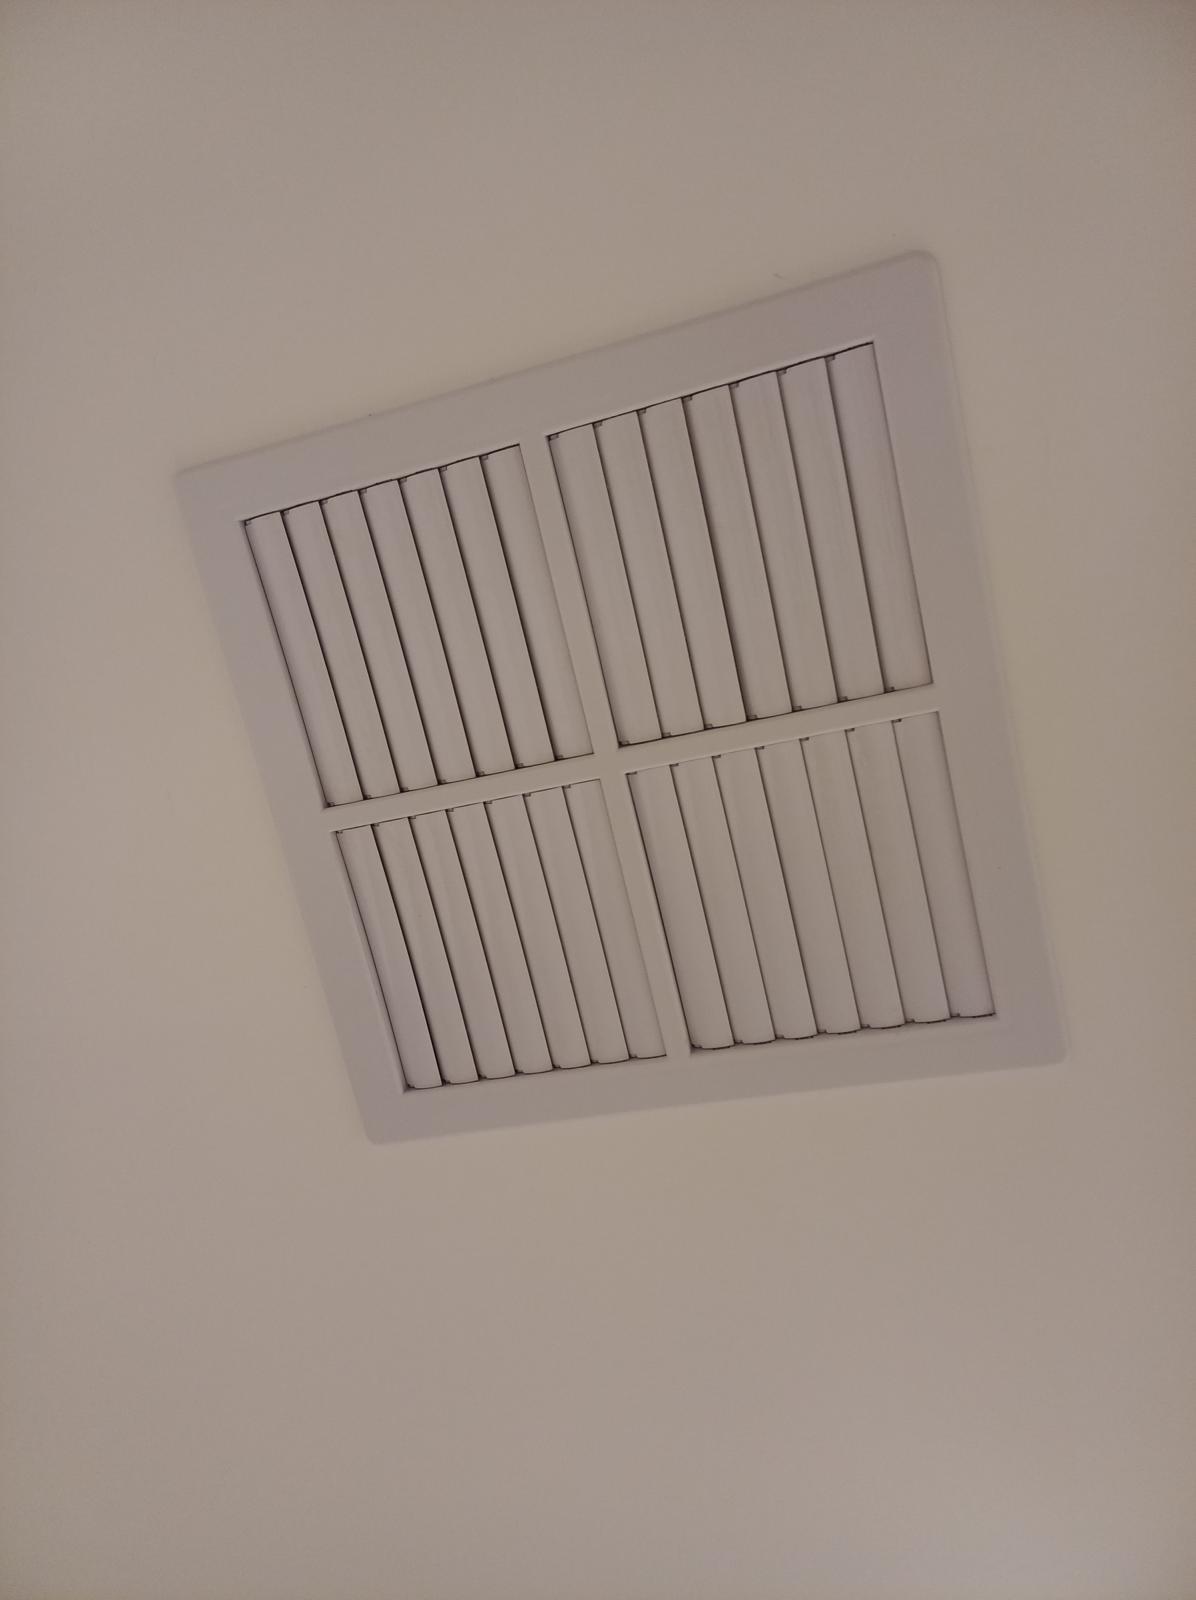 How to remove ceiling air con vent?